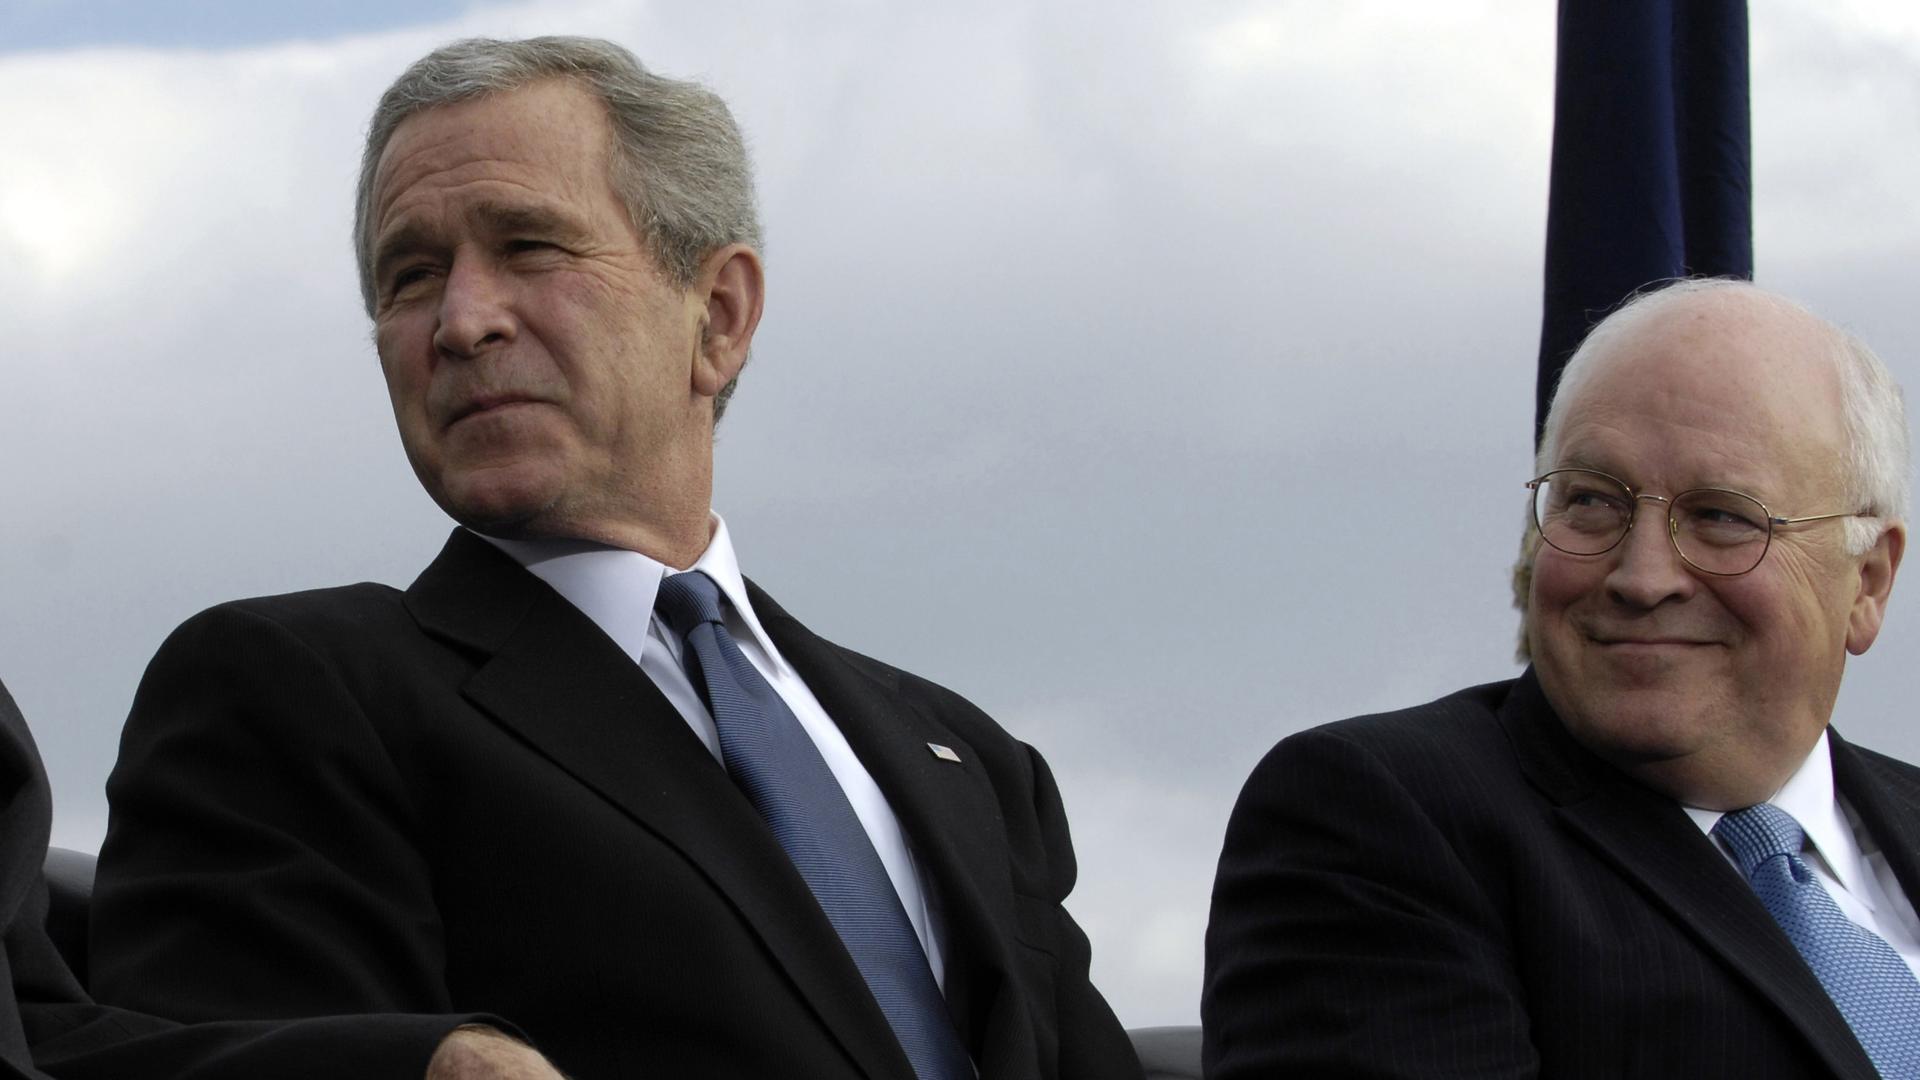 Dick Cheney lost influence as the Bush administration moved into its second term. Here are the two men at a Pentagon ceremony in December 2006.